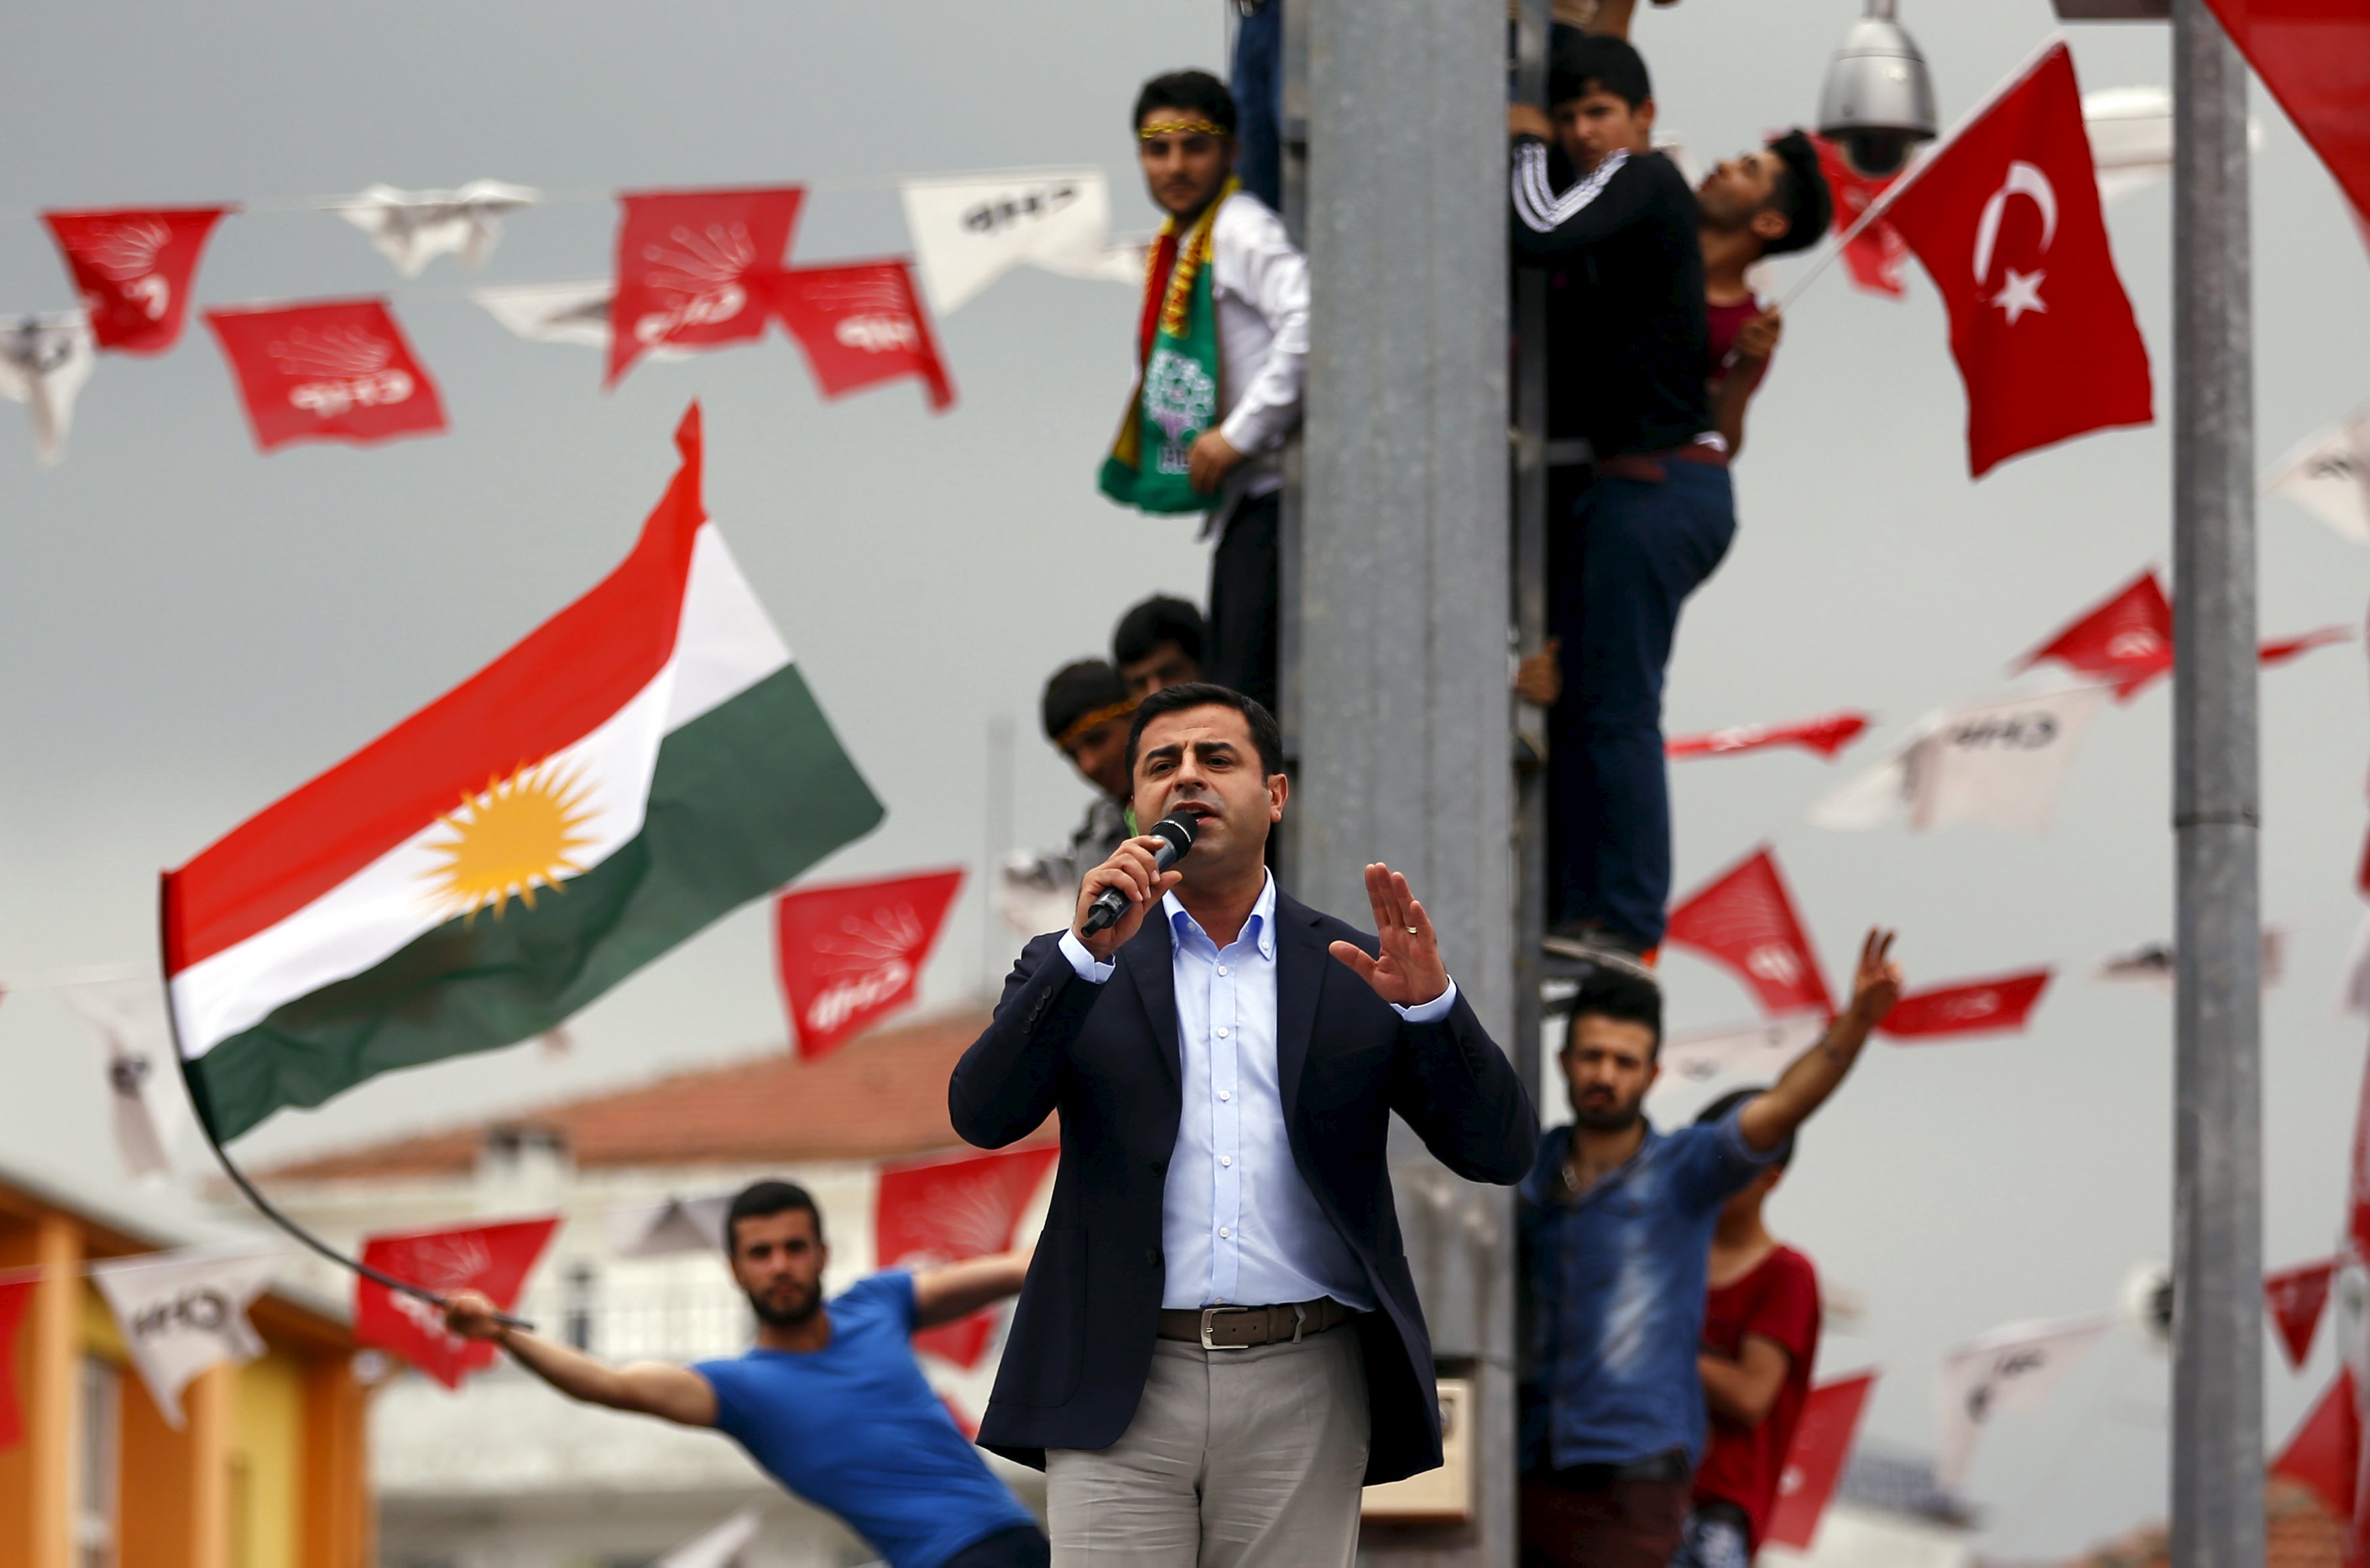 Selahattin Demirtas, co-chairman of the pro-Kurdish Peoples' Democratic Party (HDP), speaks as his supporters wave Kurdish (L) and Turkish national (R) flags in the background, during an election rally for Turkey's June 7 parliamentary election, in Istanbul, Turkey, June 6, 2015. Turkey's Kurdish-rooted opposition party, which could scupper Tayyip Erdogan's ambitions for sweeping new powers, accused the President on Saturday of a lack of respect for supporters killed in a bomb attack in an election rally and demanded he apologise. REUTERS/Murad Sezer